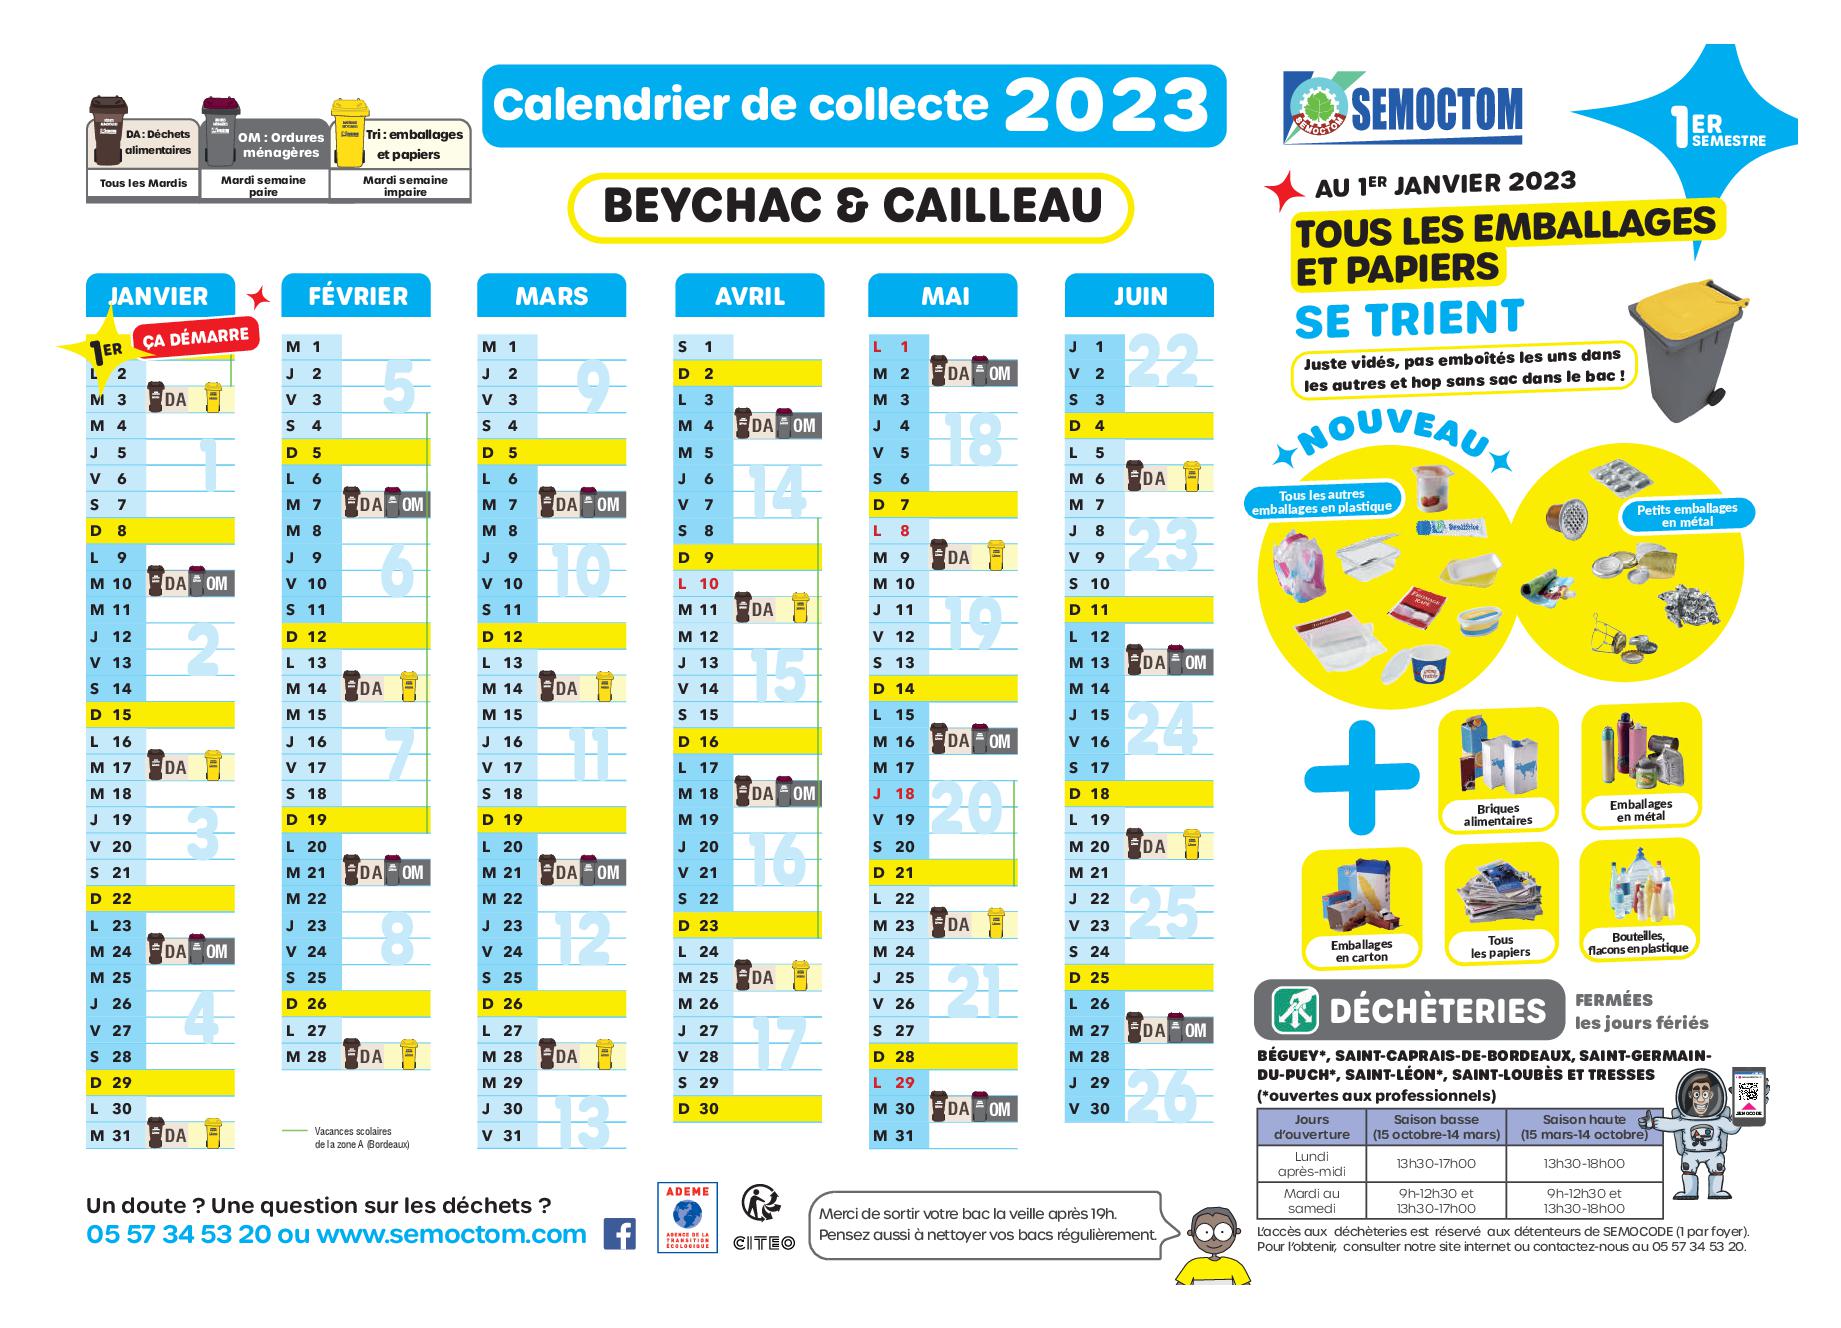 2023 SEMOCTOM r201_9_semoctom_cal_a4_beychacetcailleausc_compressed1